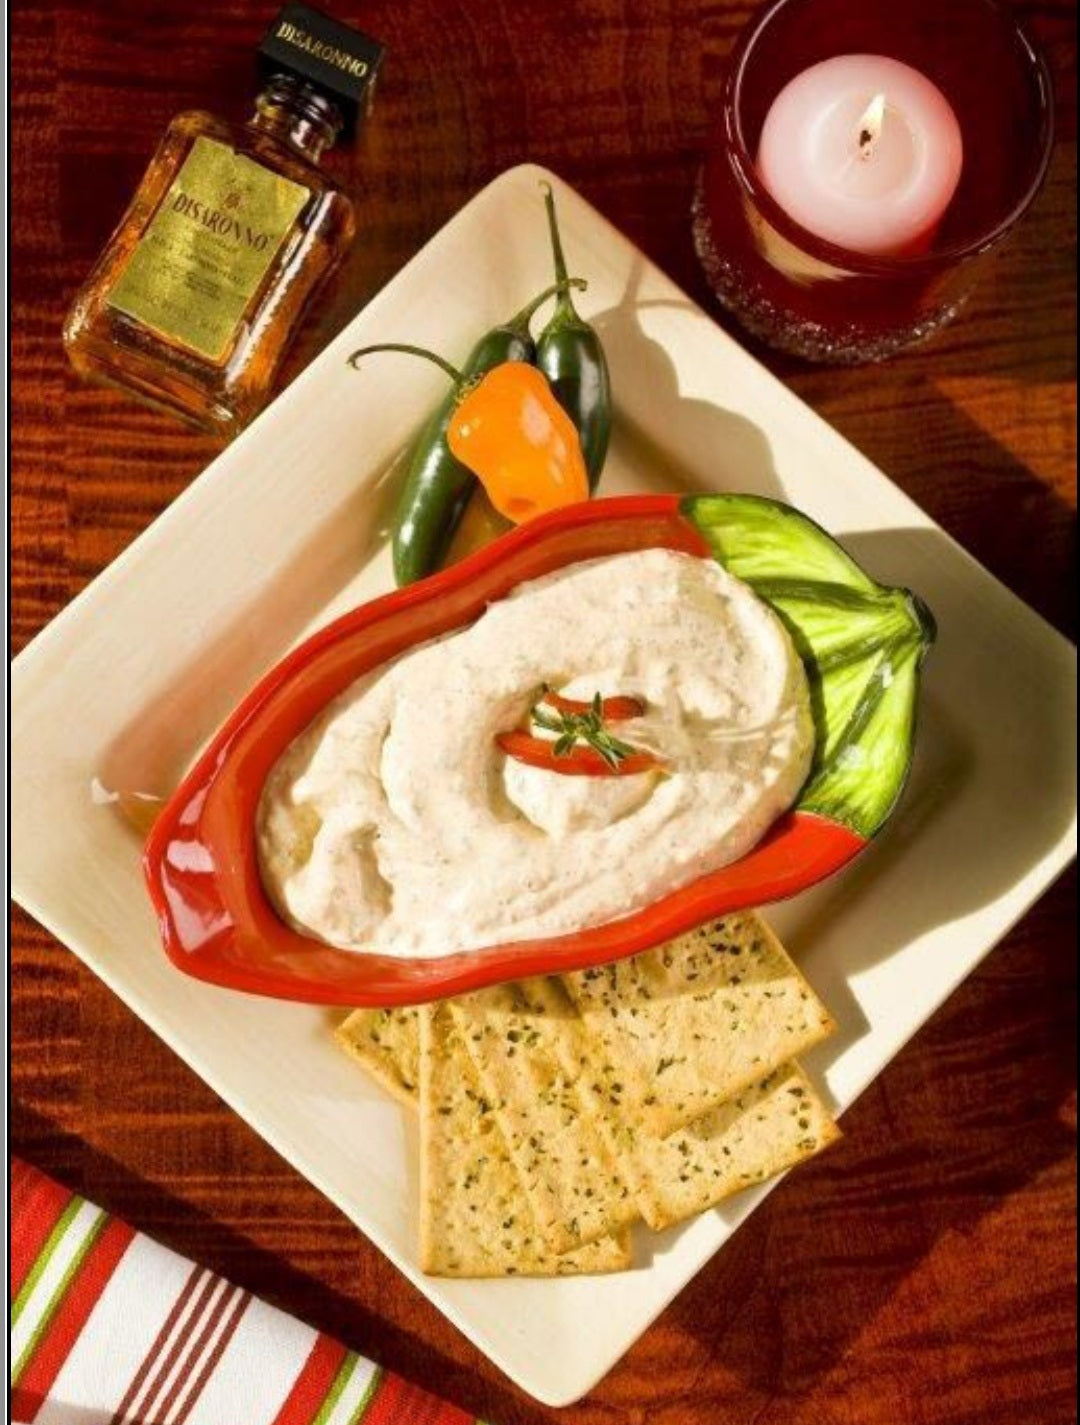 Roasted red pepper dip and cooking blend